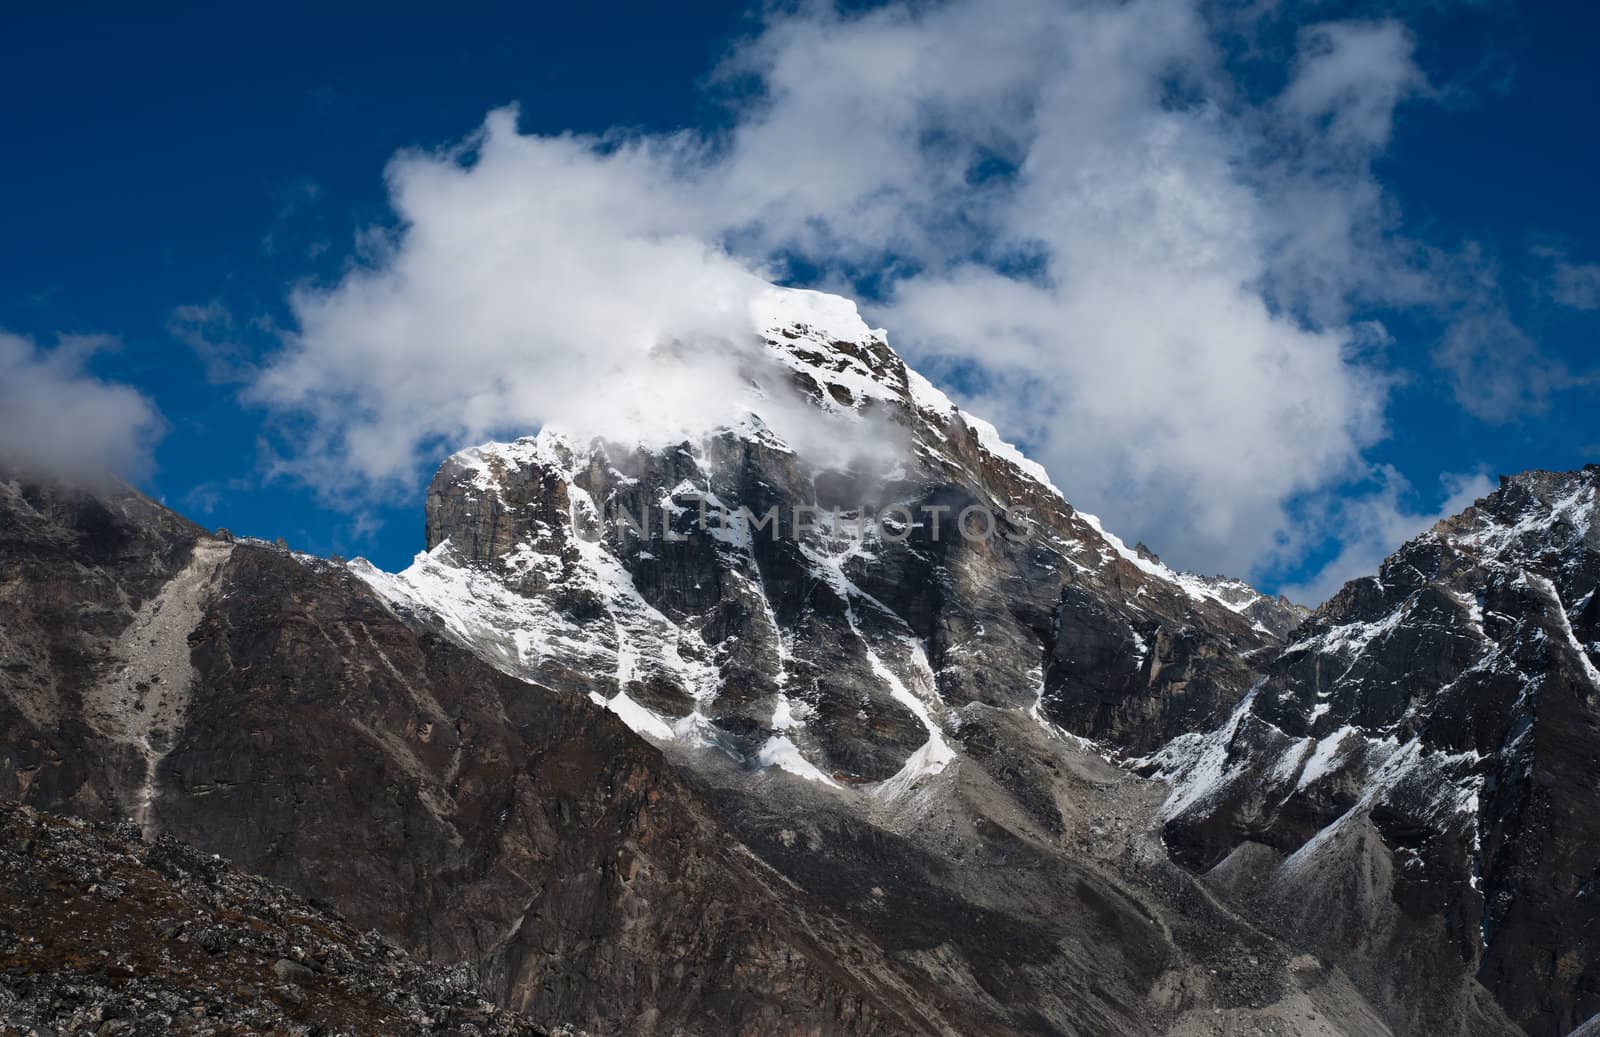 Mountains near Gokyo and Sacred lakes in Himalayas. Shot in Nepal, 4800 m